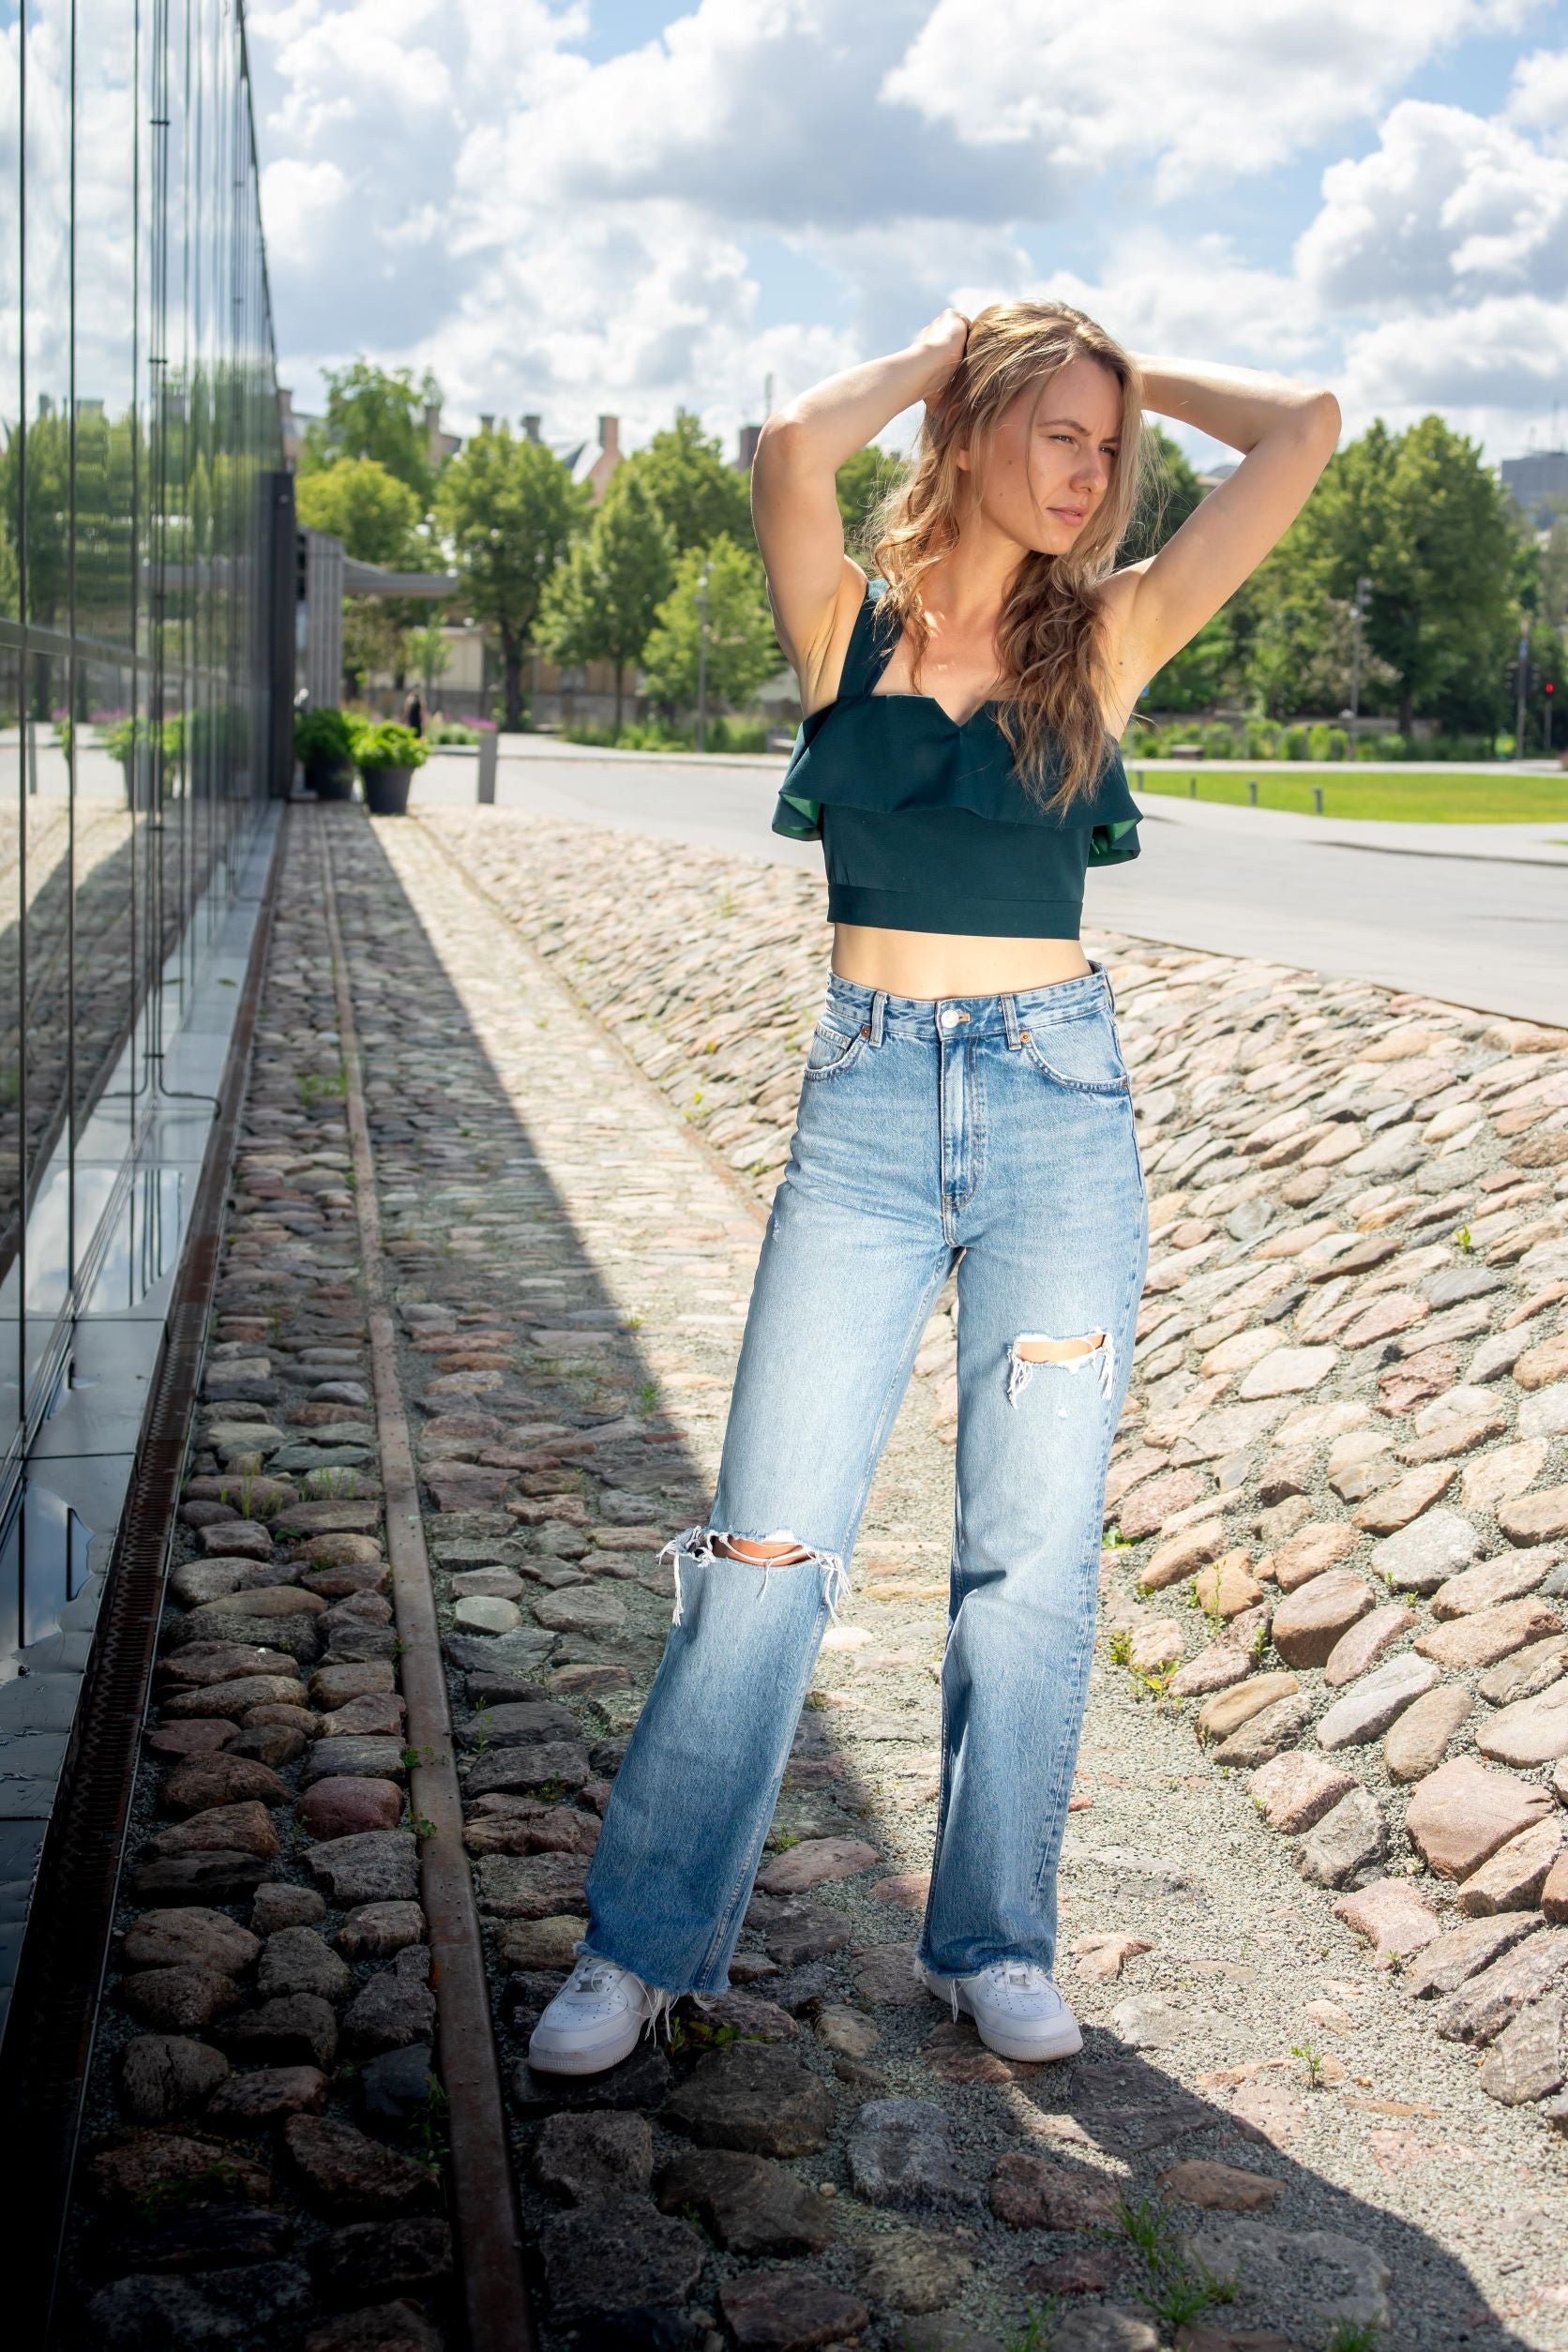 lady in an emerald green ruffled top and jeans and white sneakers